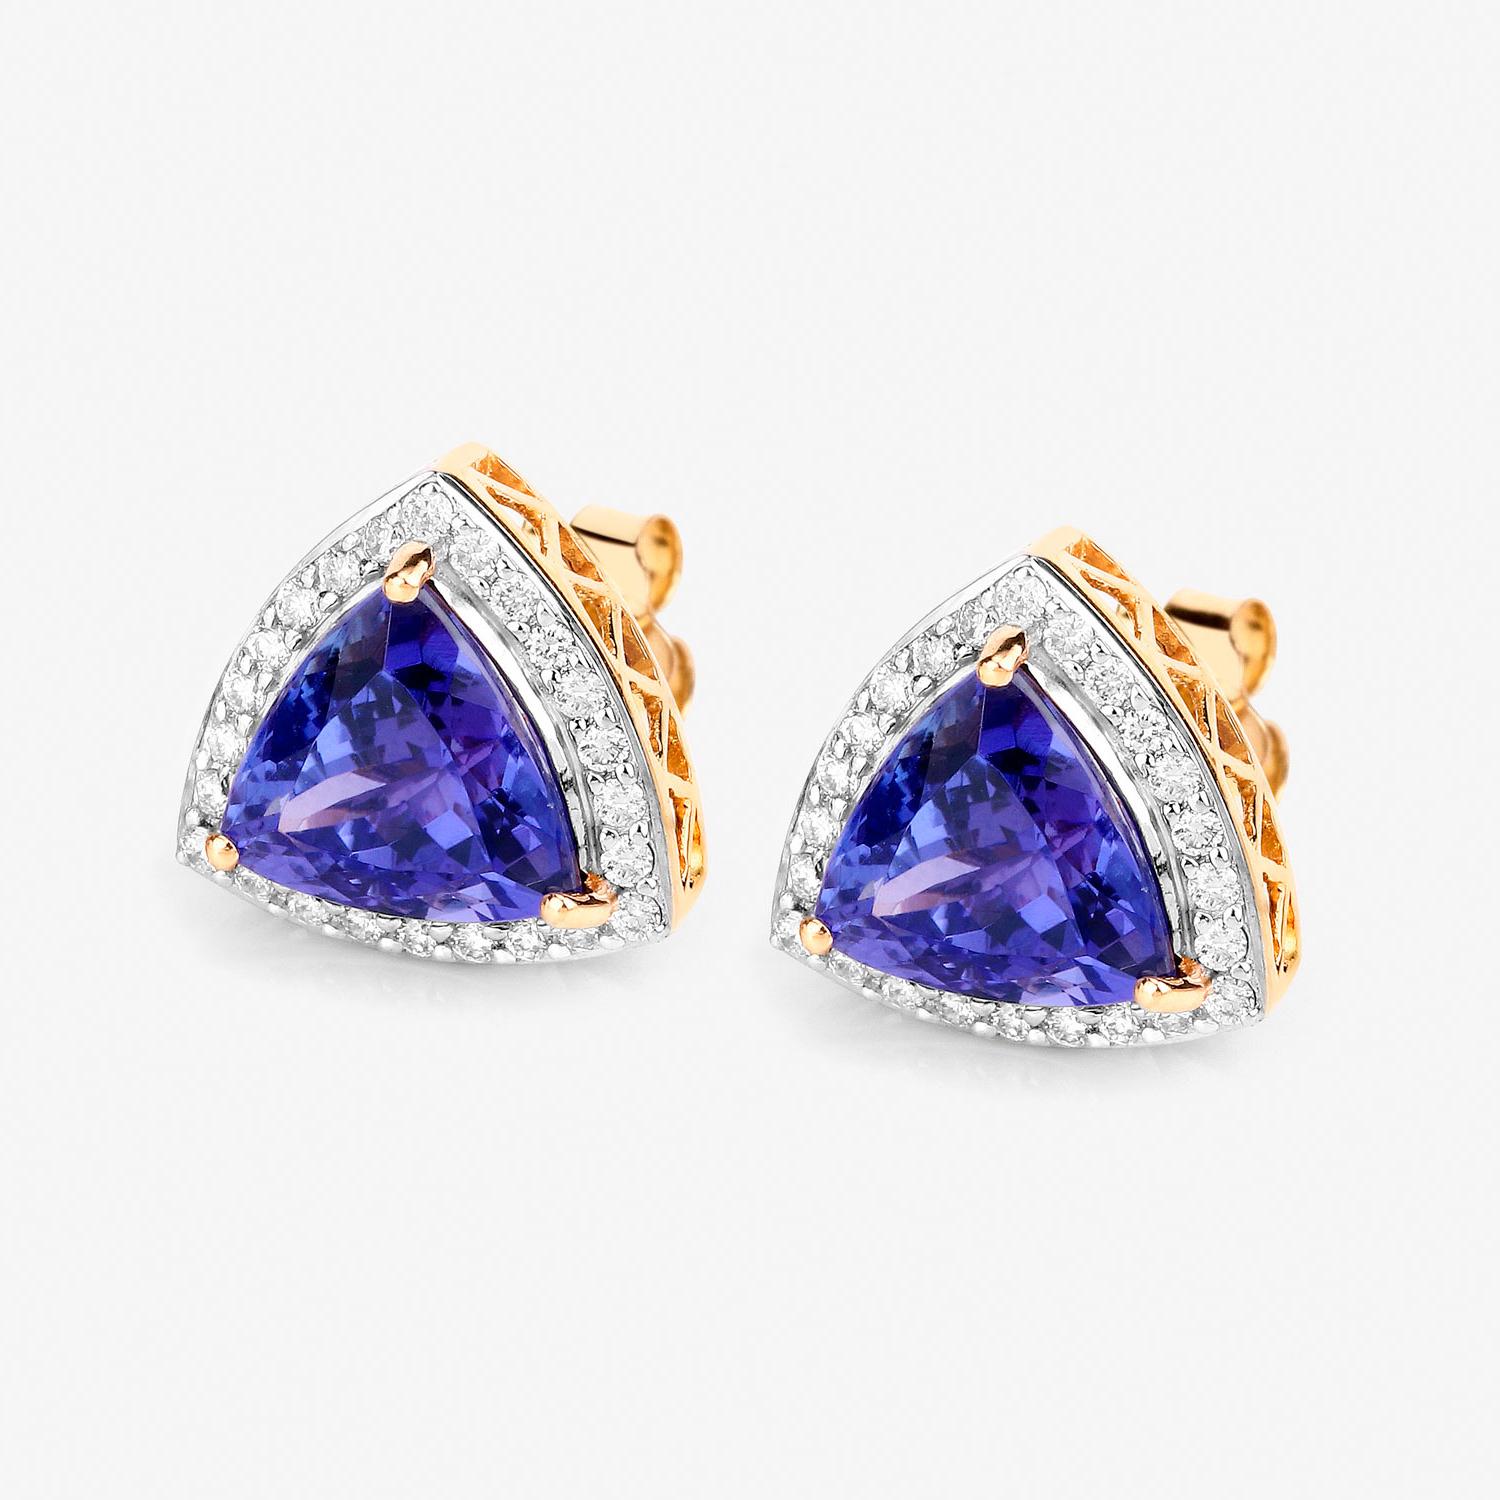 Trillion Cut Tanzanite Stud Earrings Diamond Halo 4.74 Carats 14K Gold In Excellent Condition For Sale In Laguna Niguel, CA